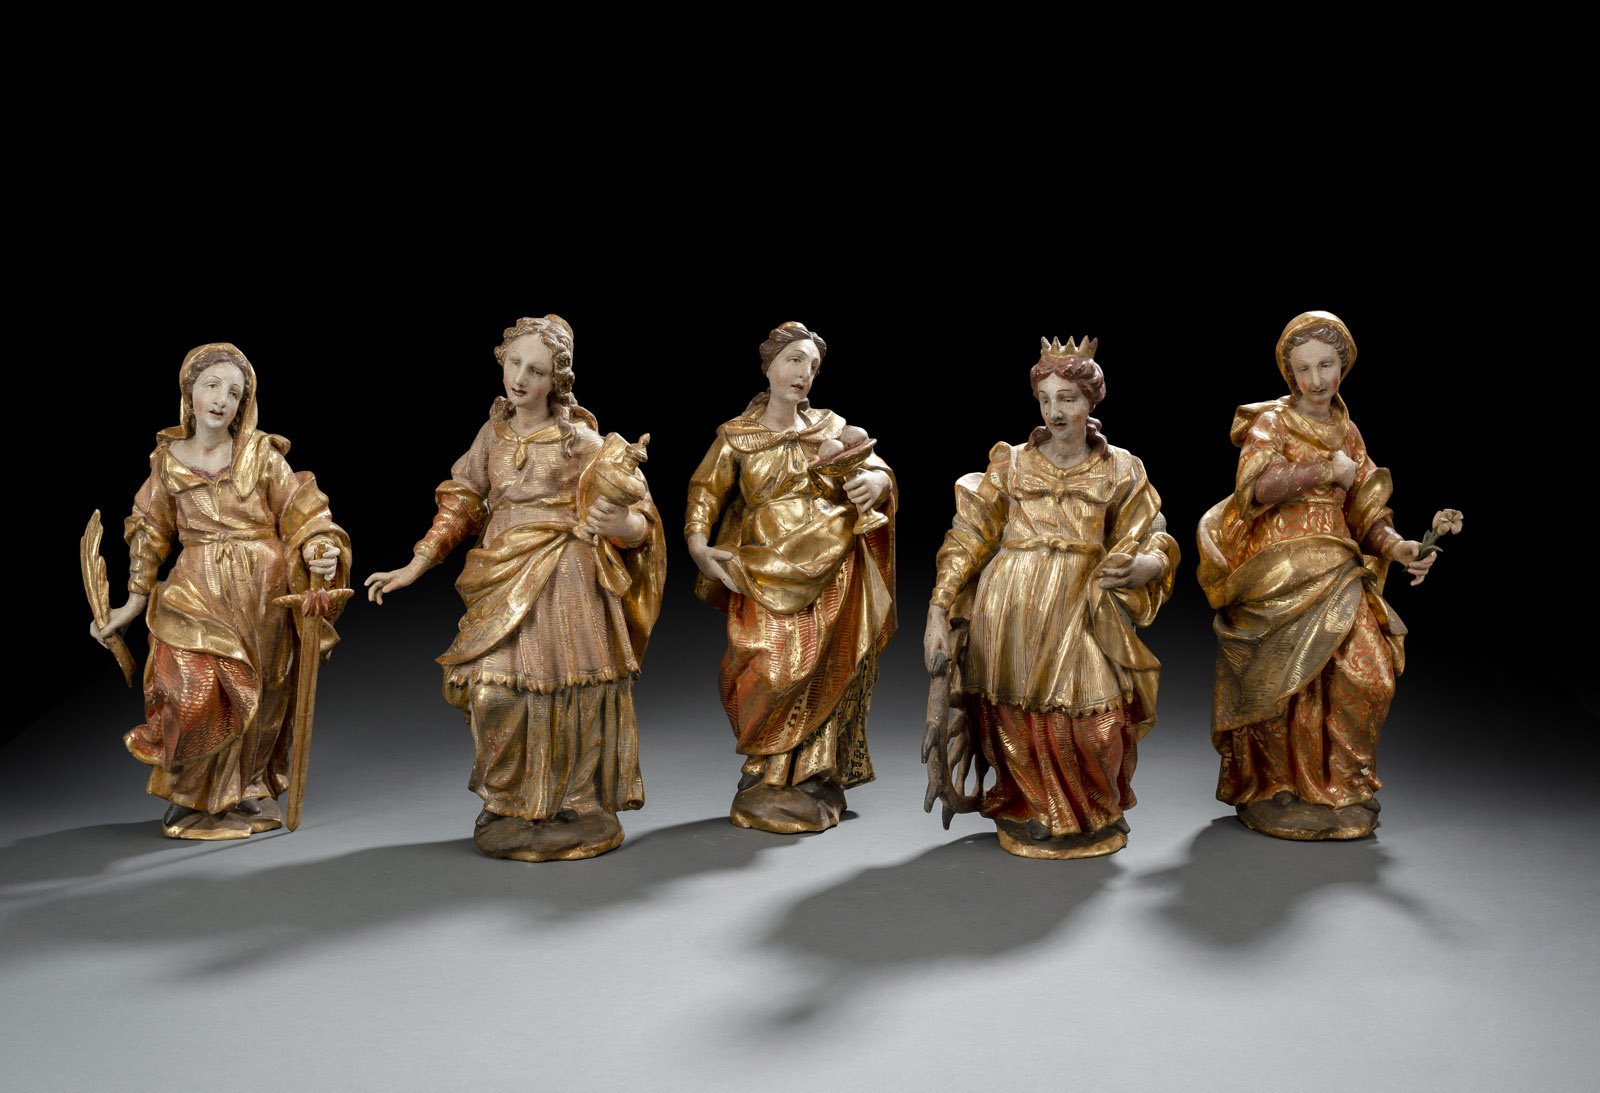 <b>A RARE GROUP OF FIVE FEMALE HOLY MARTYRS</b>